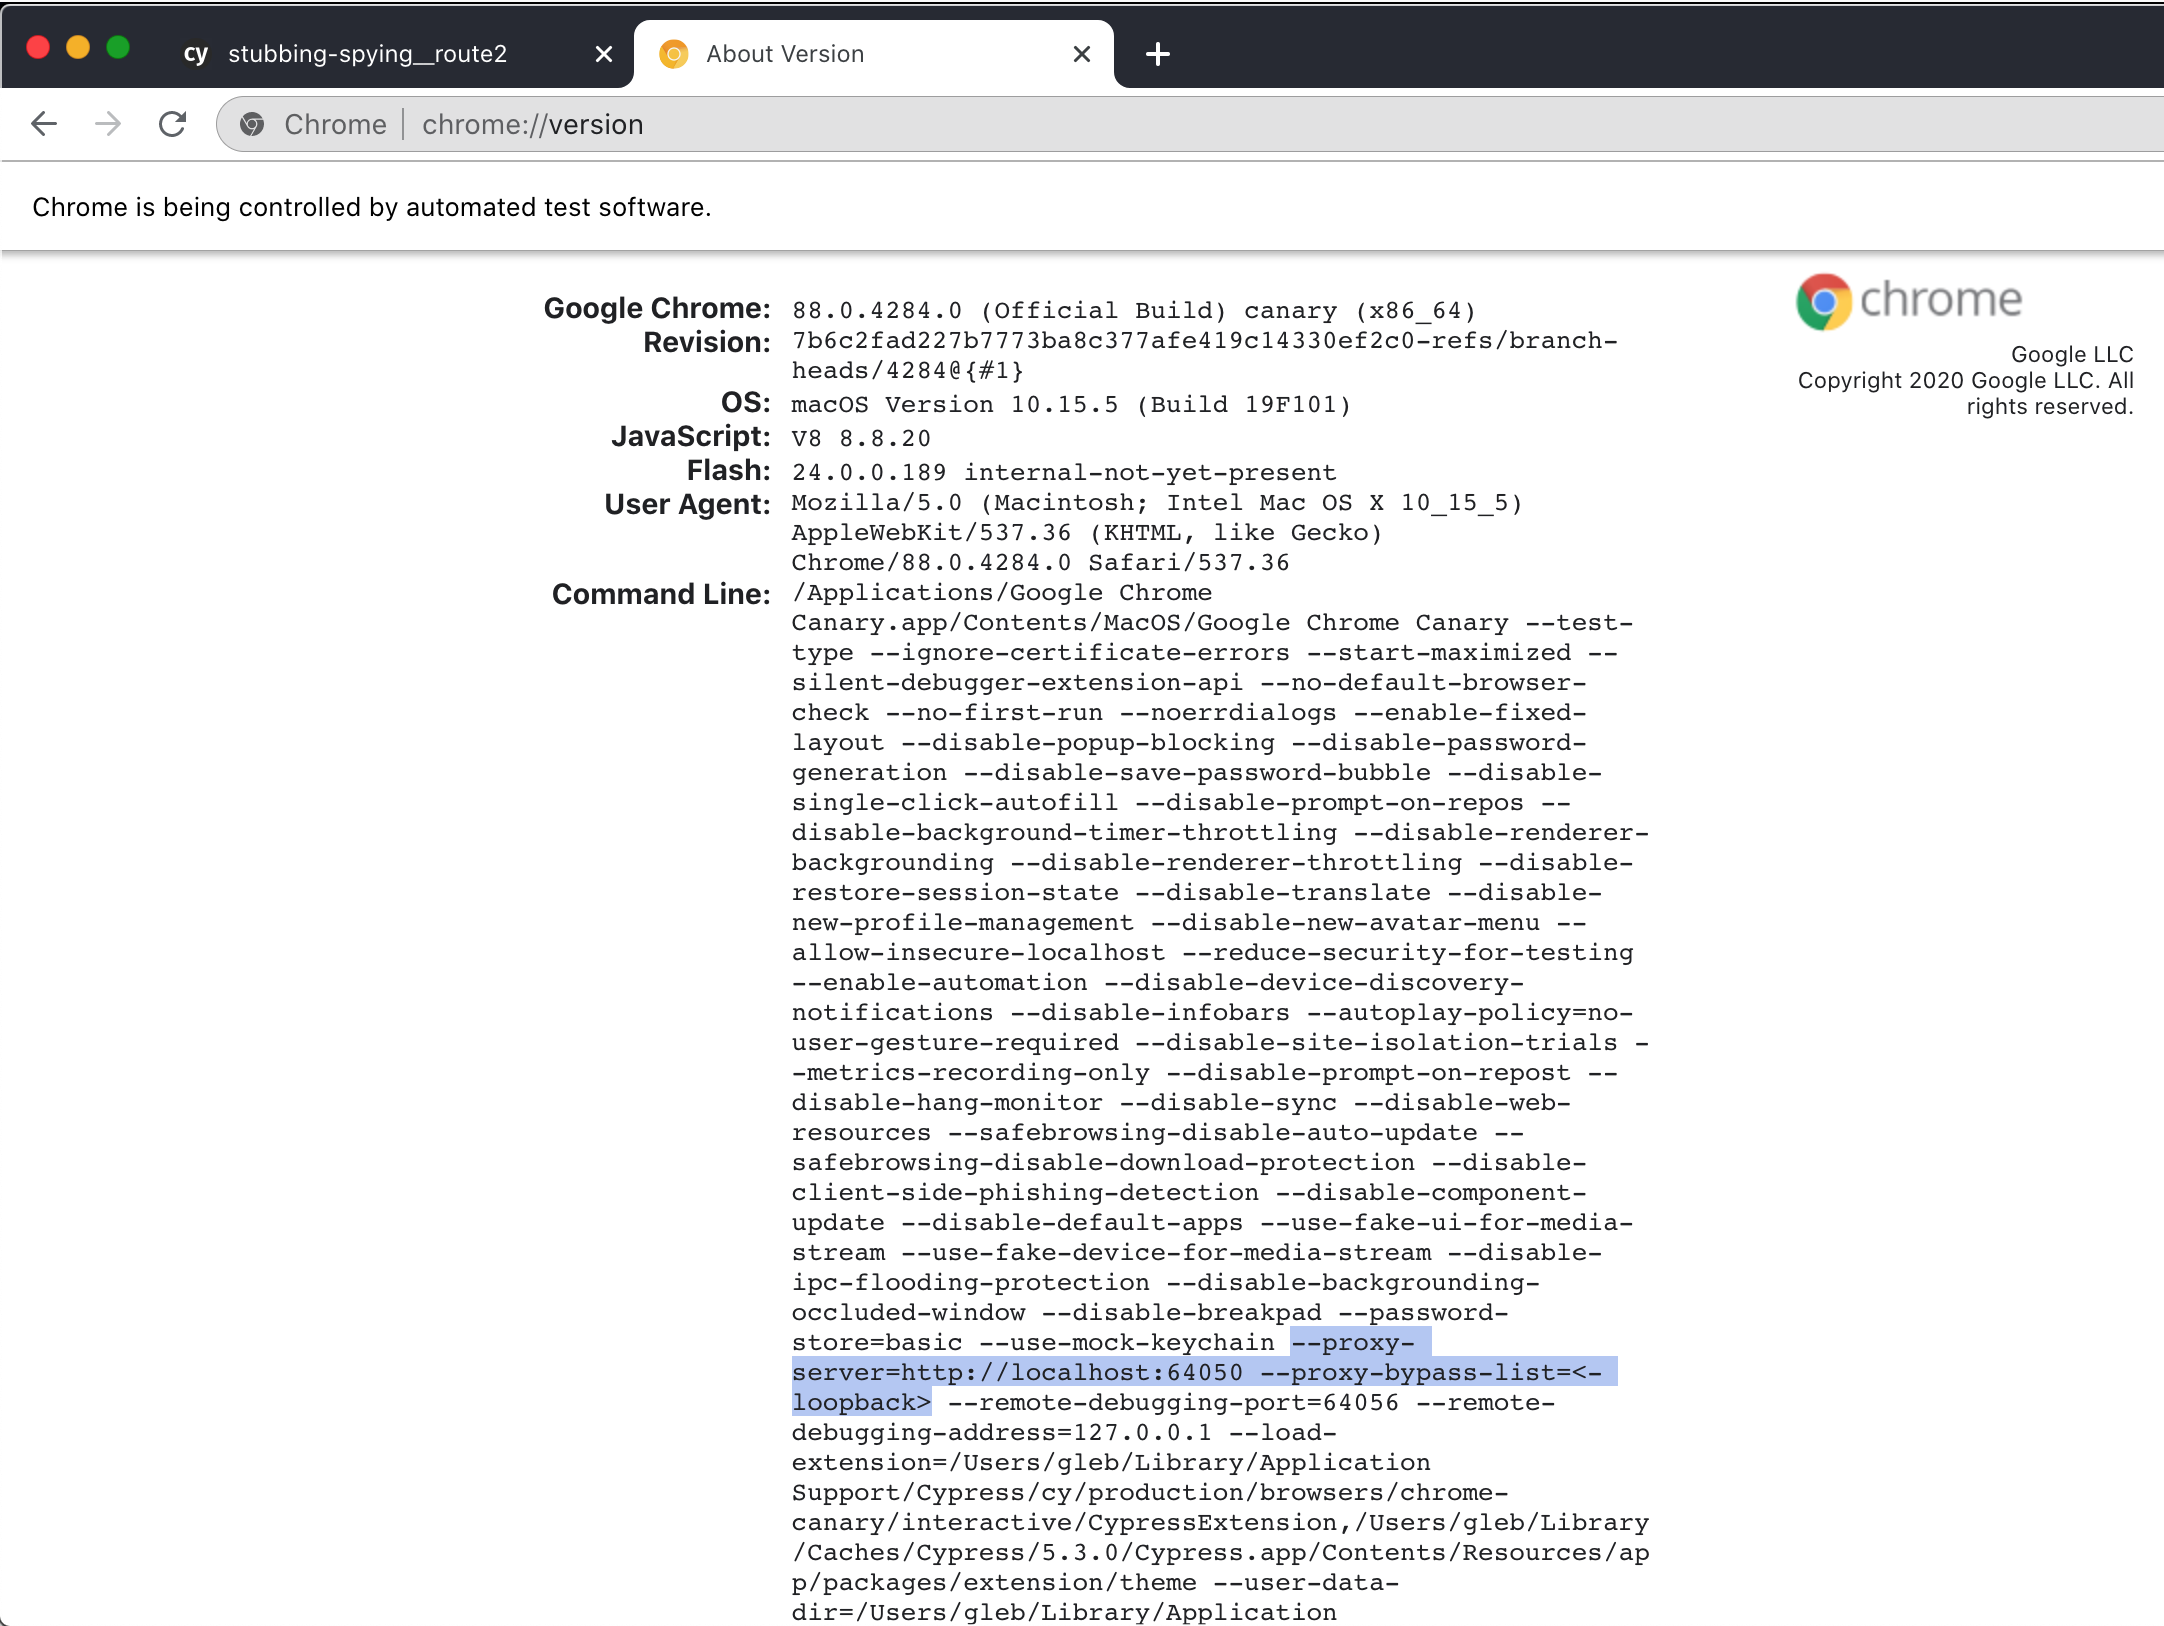 Cypress launches Chrome browser with proxy command line switch pointing back at the Cypress app